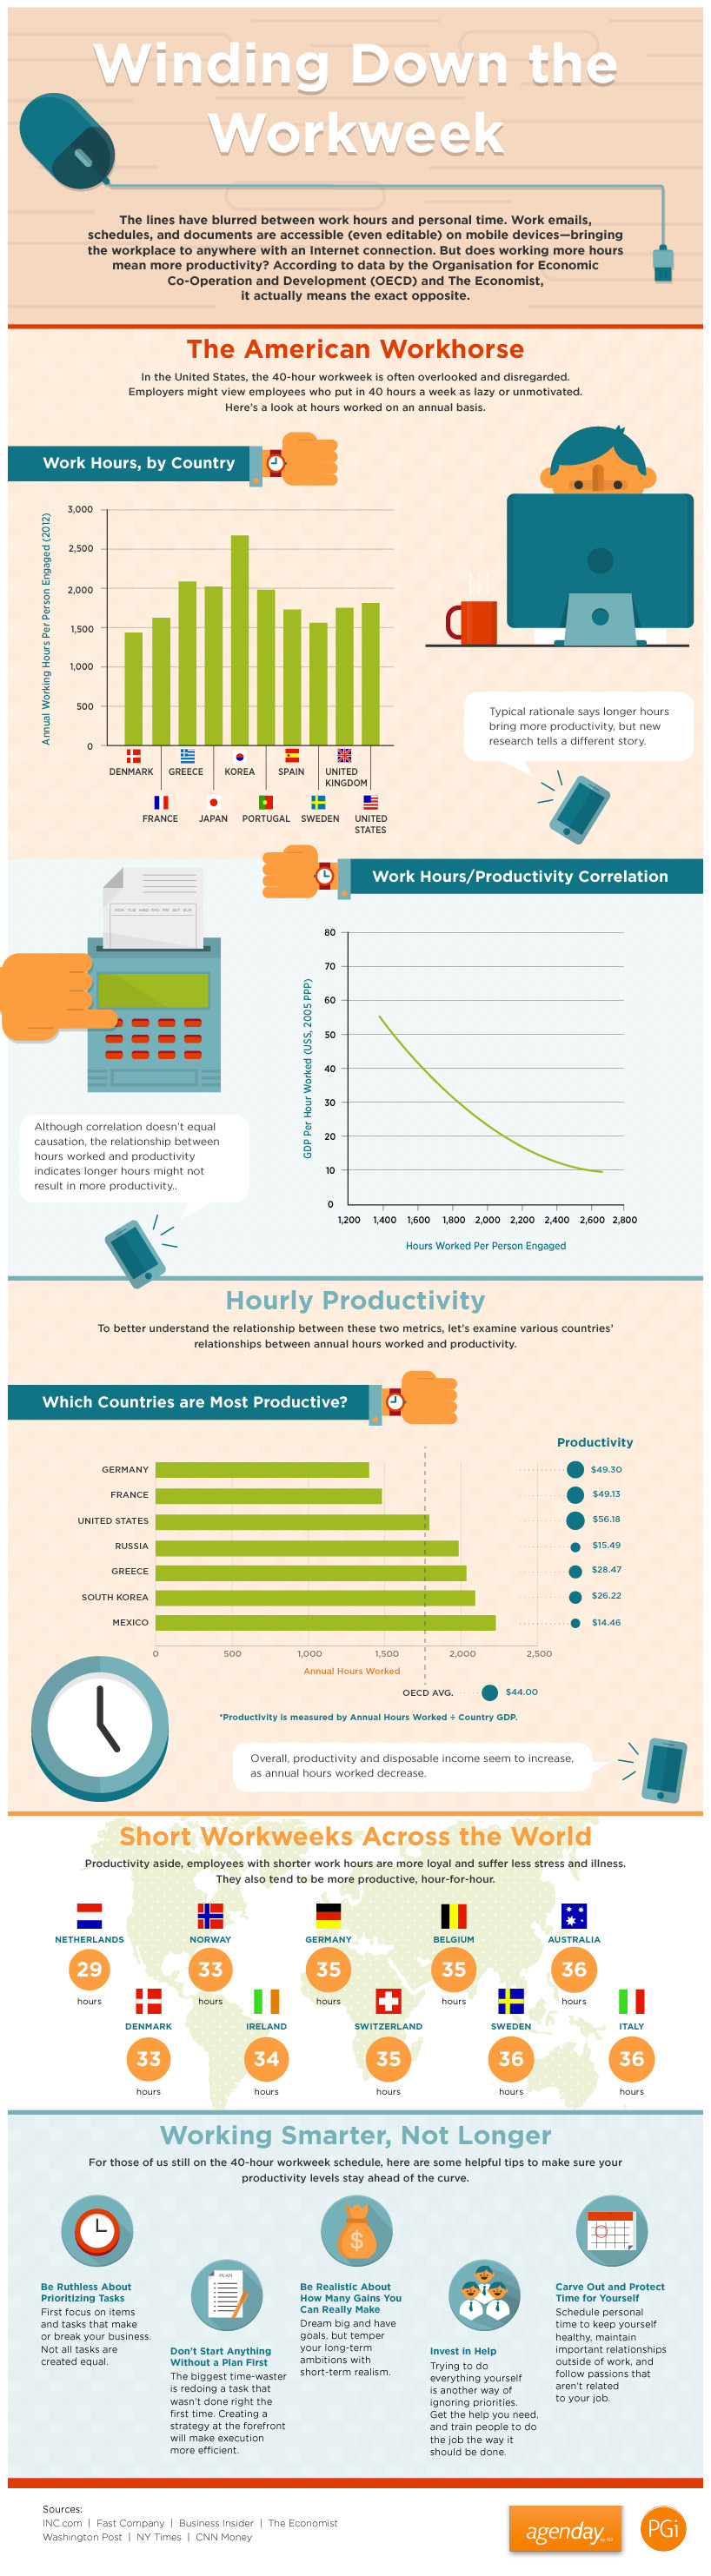 Working Endless Hours Does Not Make You a Hero (Infographic)